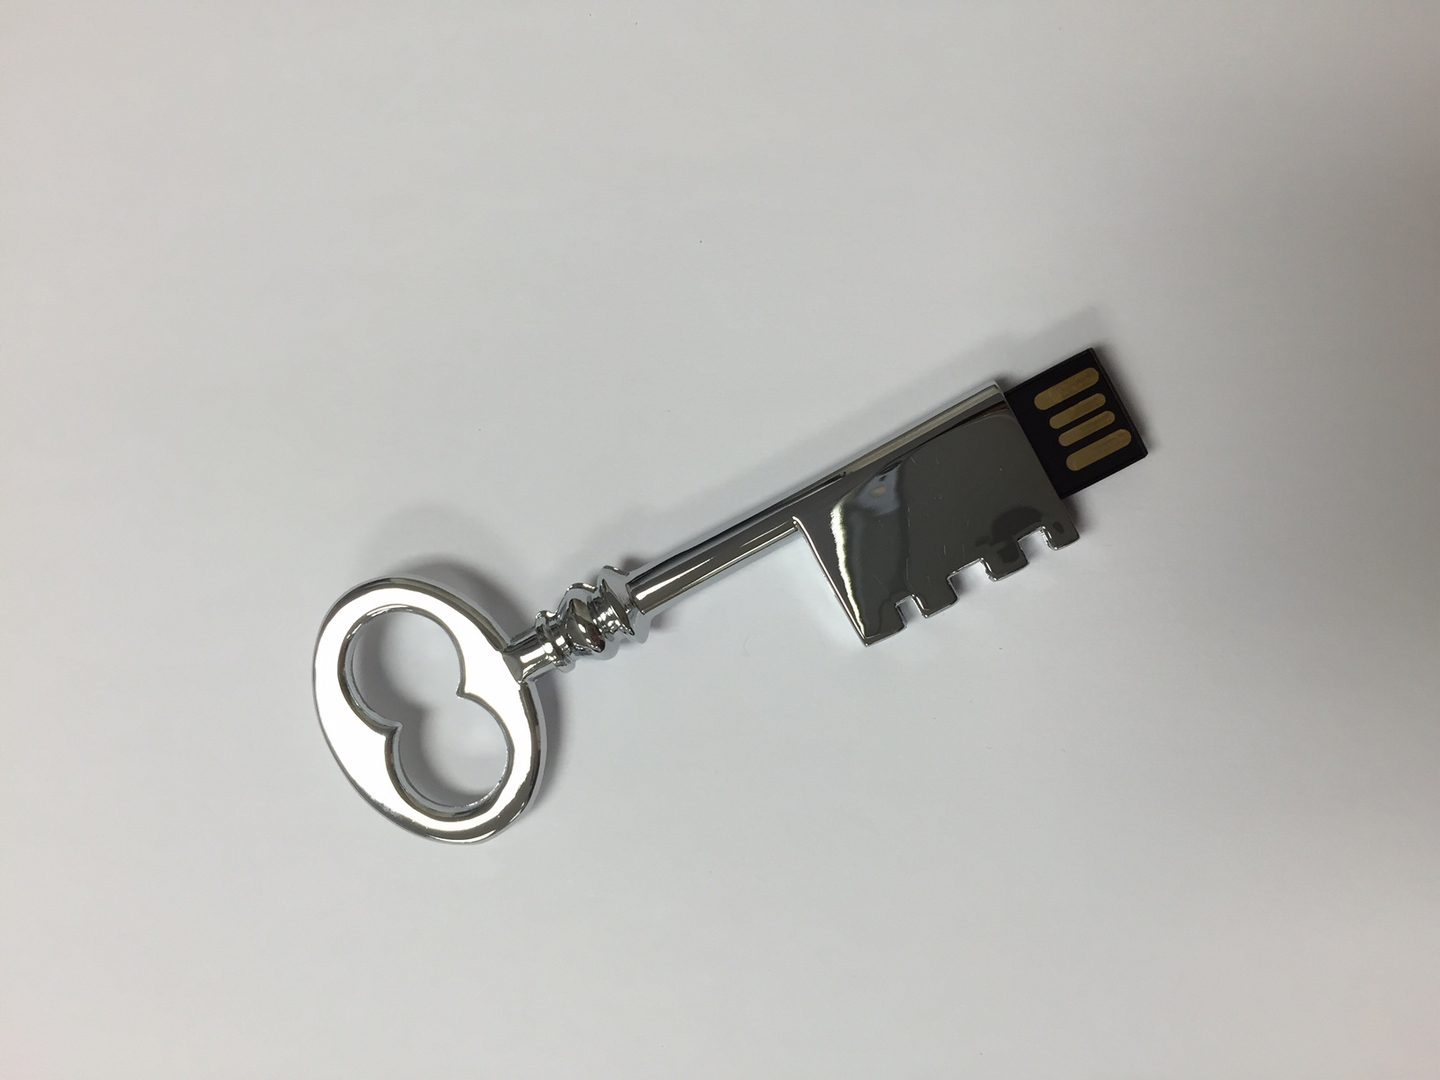 Beautifully crafted USB at NUIMPACT